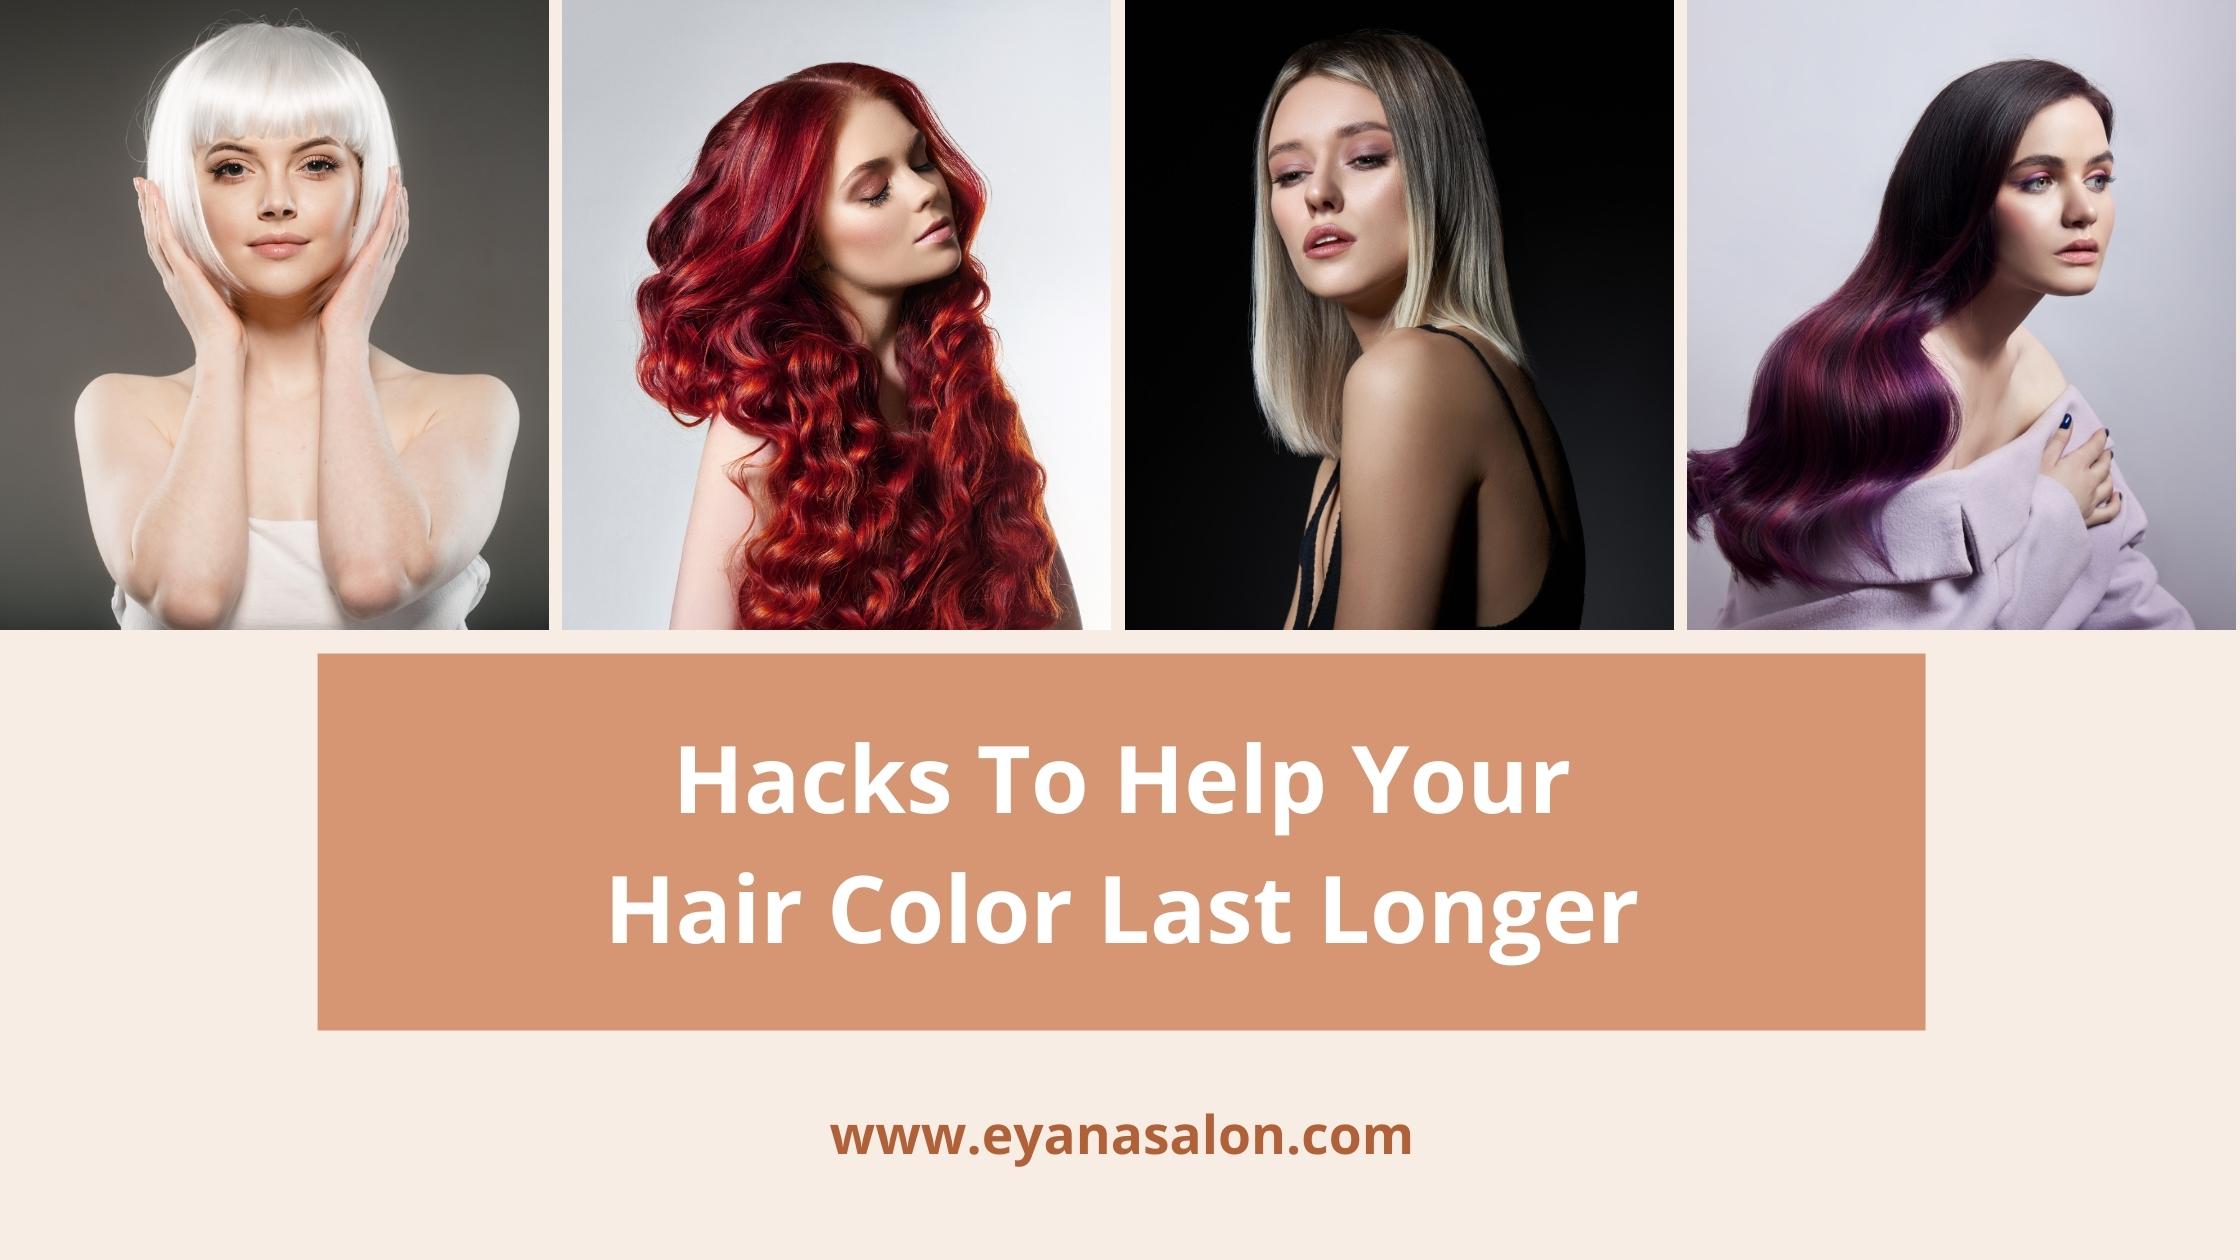 1. How to Make Blue Hair Color Last Longer - wide 11